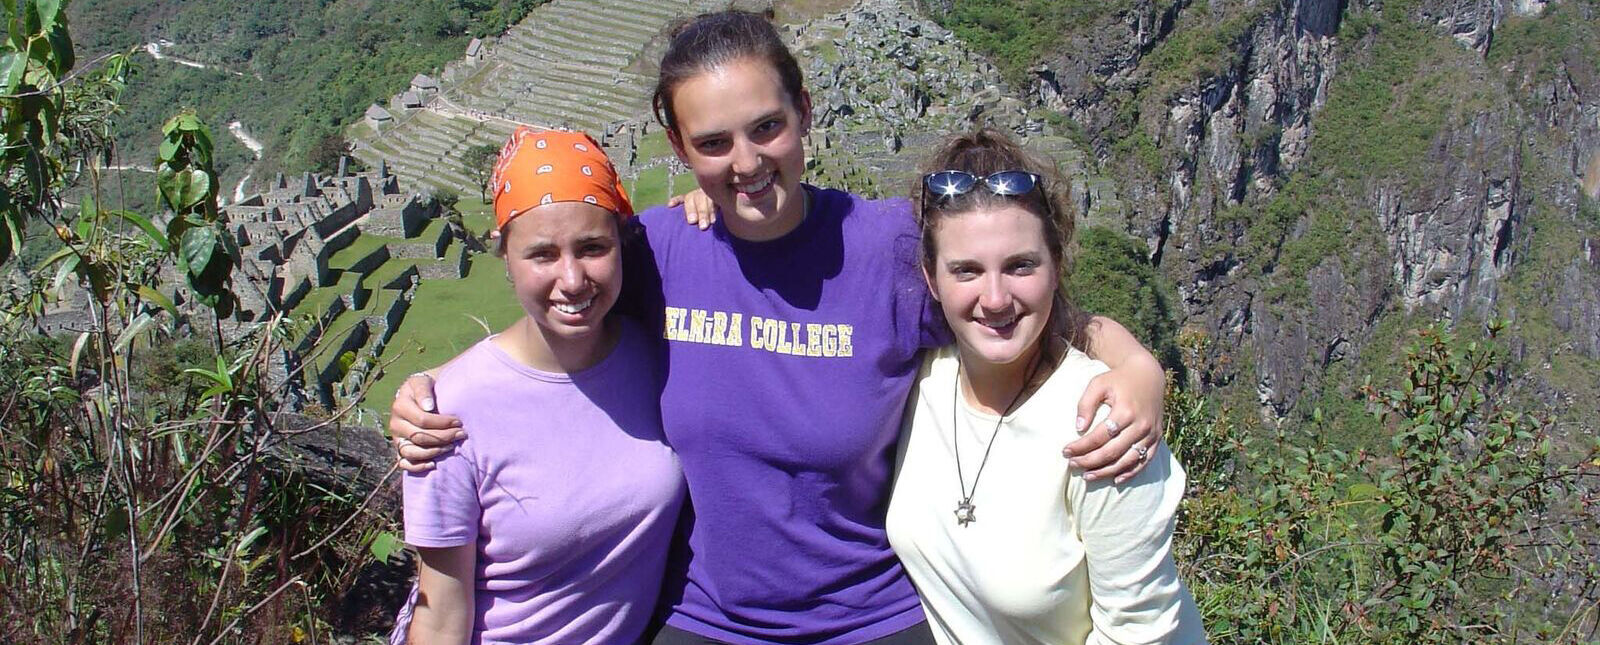 Three female students pose together during a Term III study abroad trip